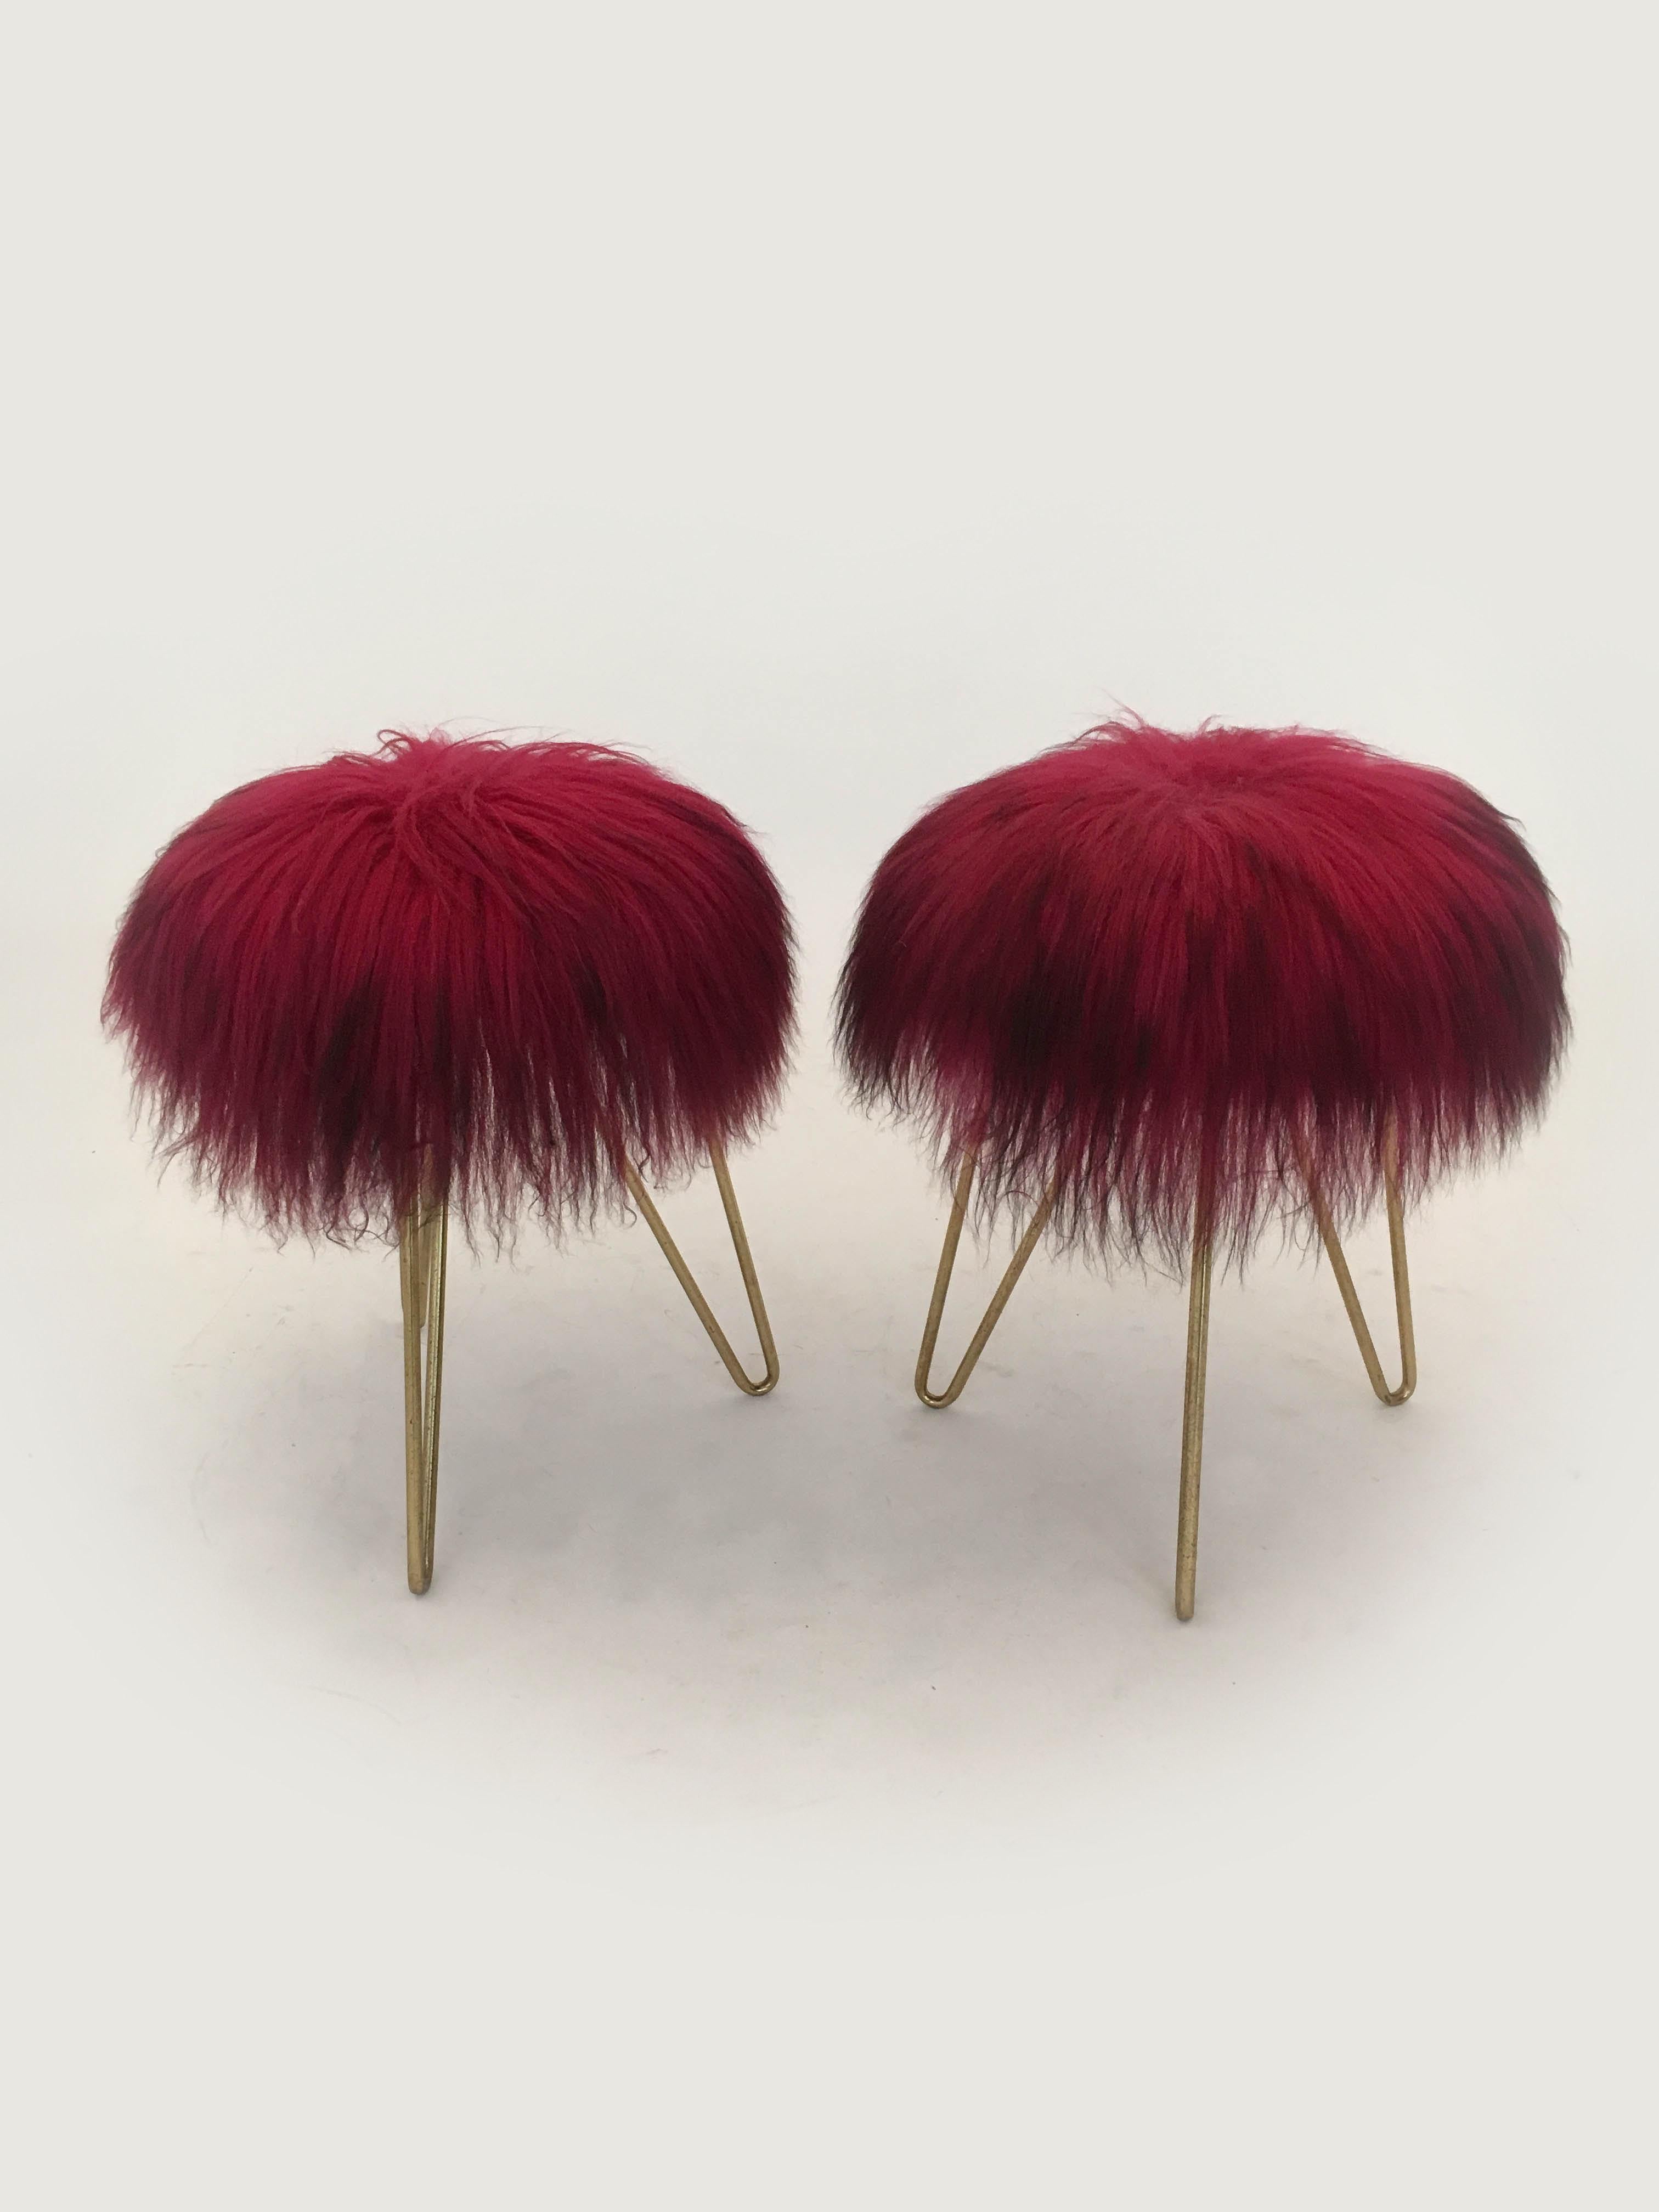 French Sheep Fur Stools, France, 1950s For Sale